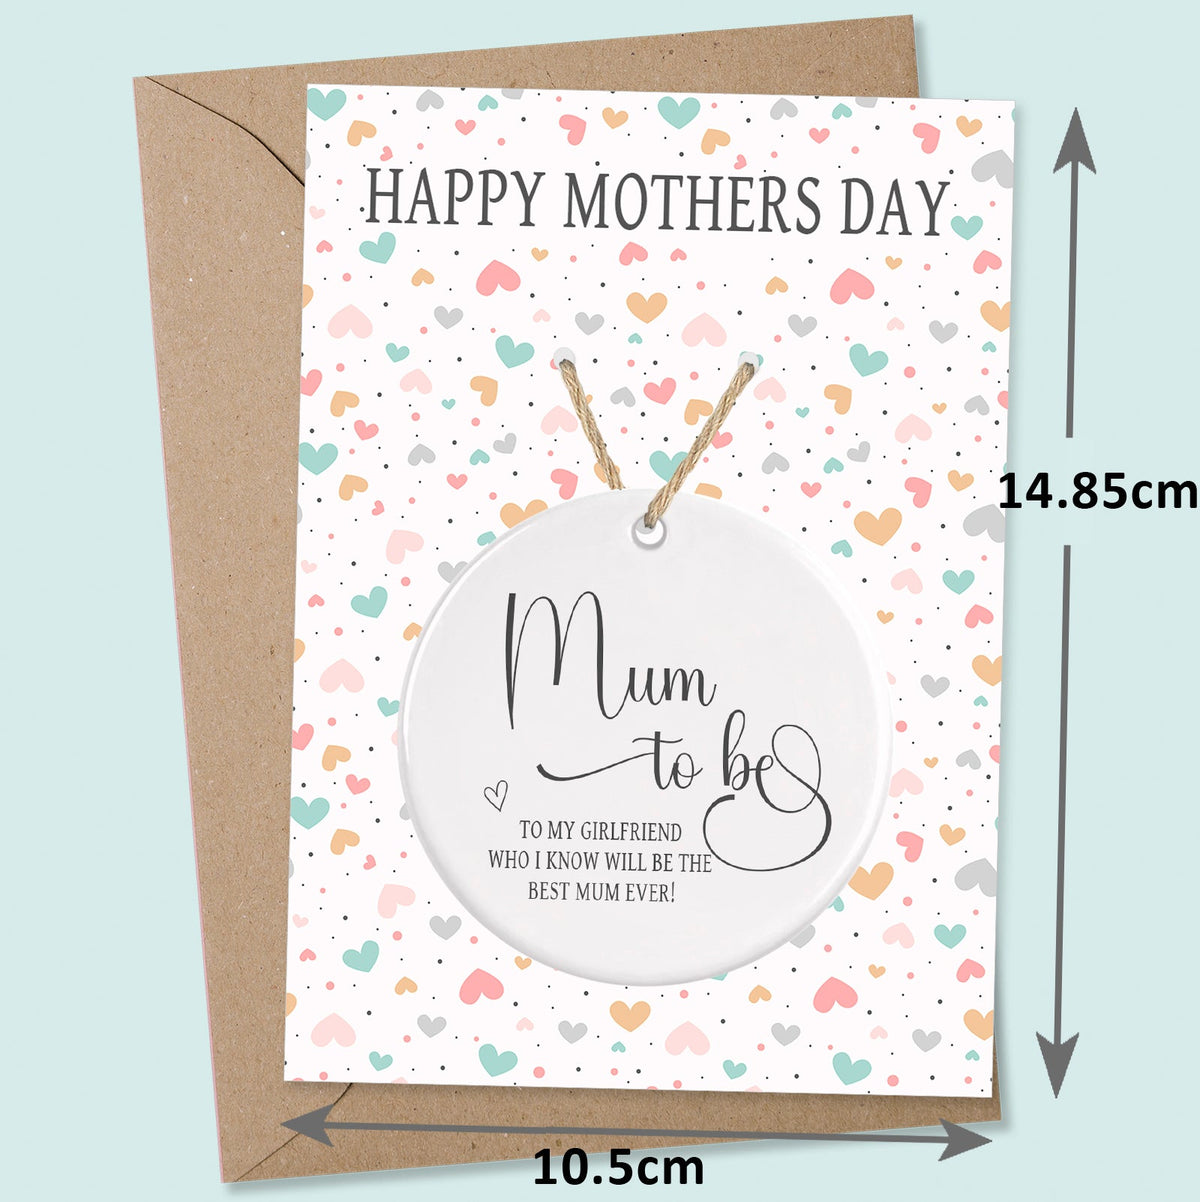 Mum To Be Mothers Day Gift for Girlfriend